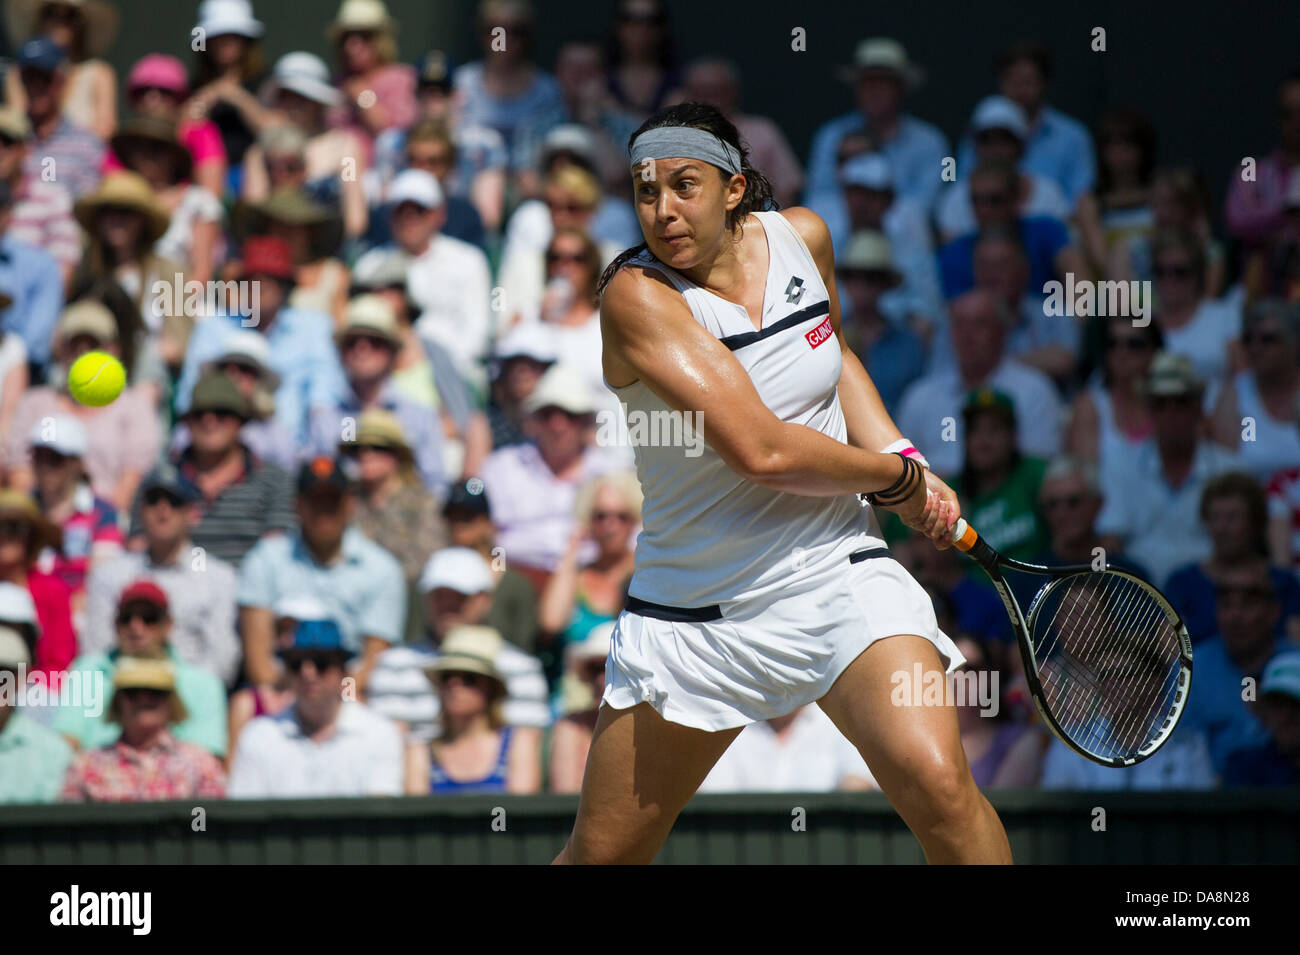 Tennis: Wimbledon Championship 2013, Marion Bartoli of France in action during the Ladies' Singles final match against Sabine Lisicki of Germany on day twelve of the Wimbledon Lawn Tennis Championships at the All England Lawn Tennis and Croquet Club on July 6, 2013 in London, England. Credit:  dpa picture alliance/Alamy Live News Stock Photo